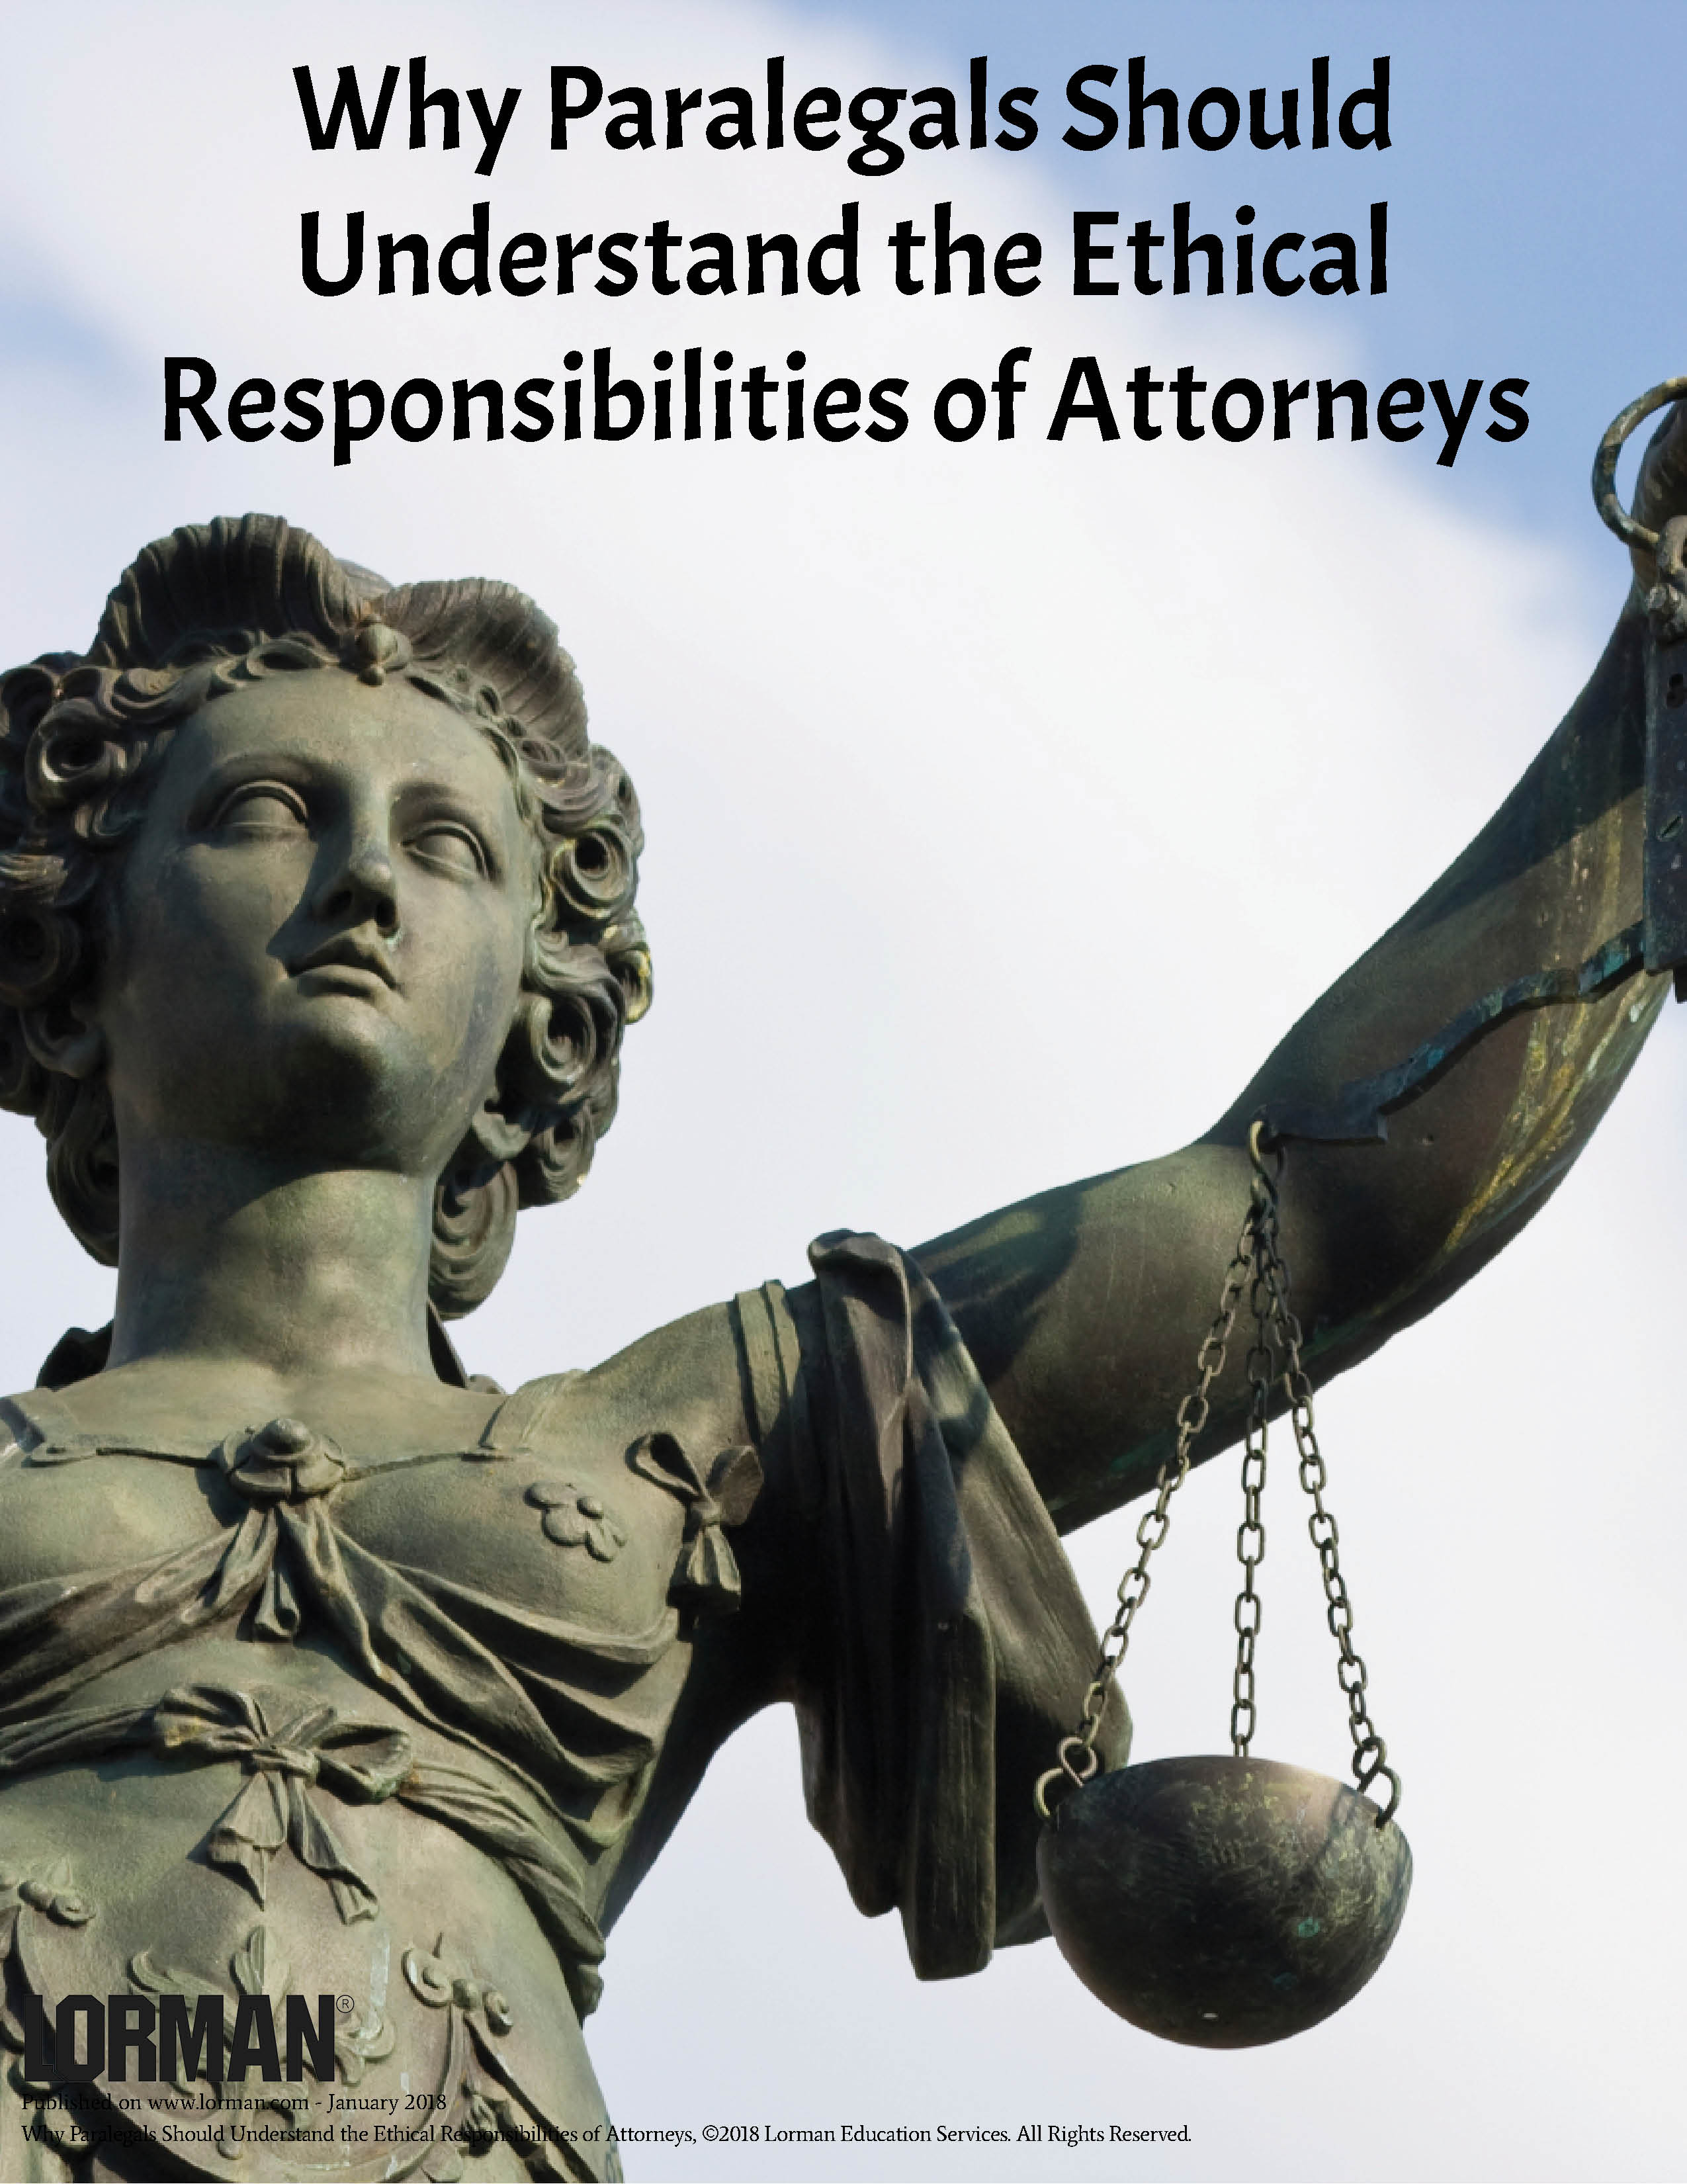 Why Paralegals Should Understand the Ethical Responsibilities of Attorneys